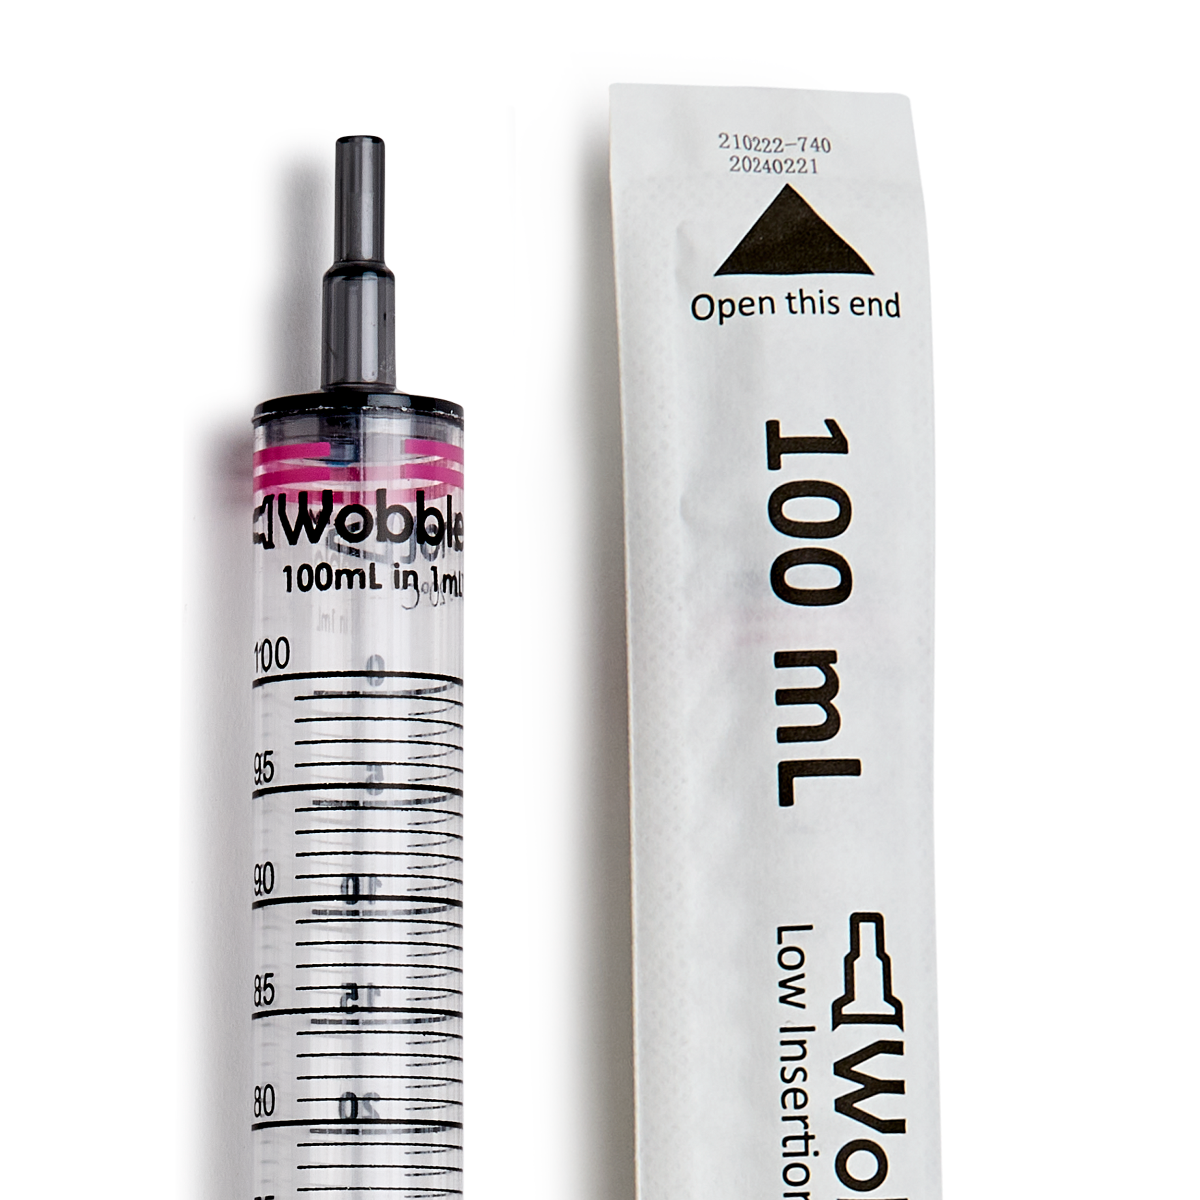 VistaLab 100 mL Wobble-not Serological Pipets